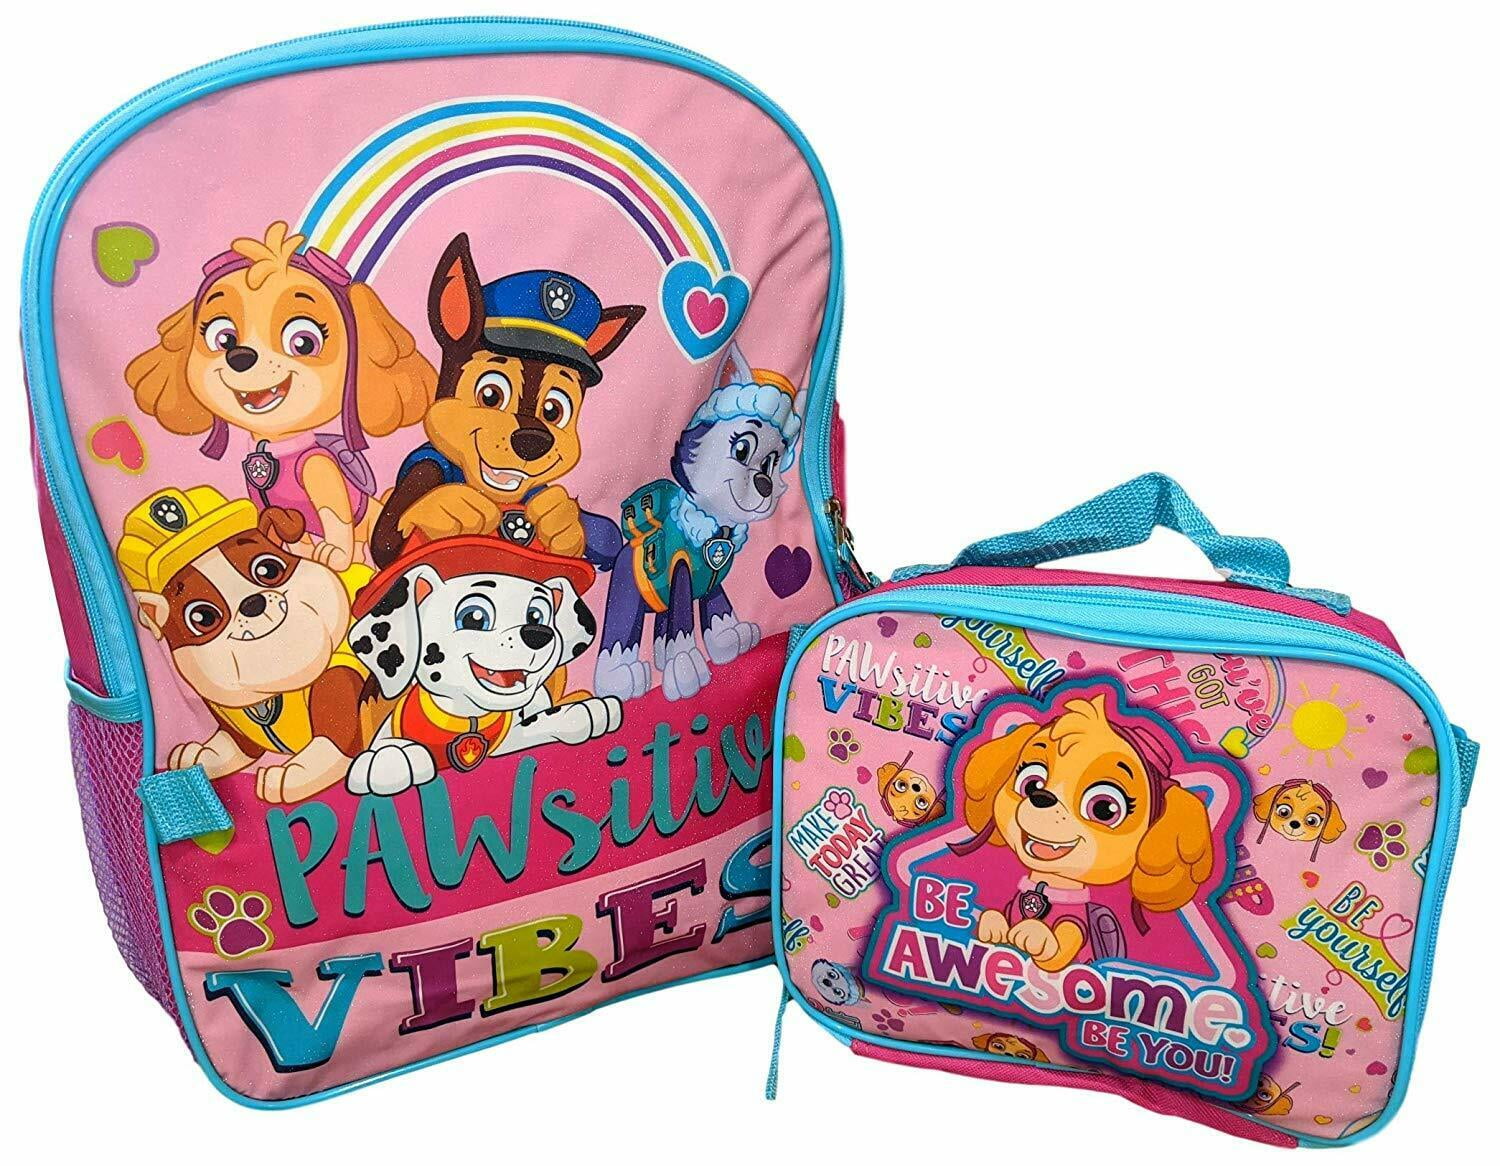 Accessory Innovations Paw Patrol Girls Be Happy 16 inch Backpack with Insulated Lunch Box Set, Girl's, Size: 16 Full Size